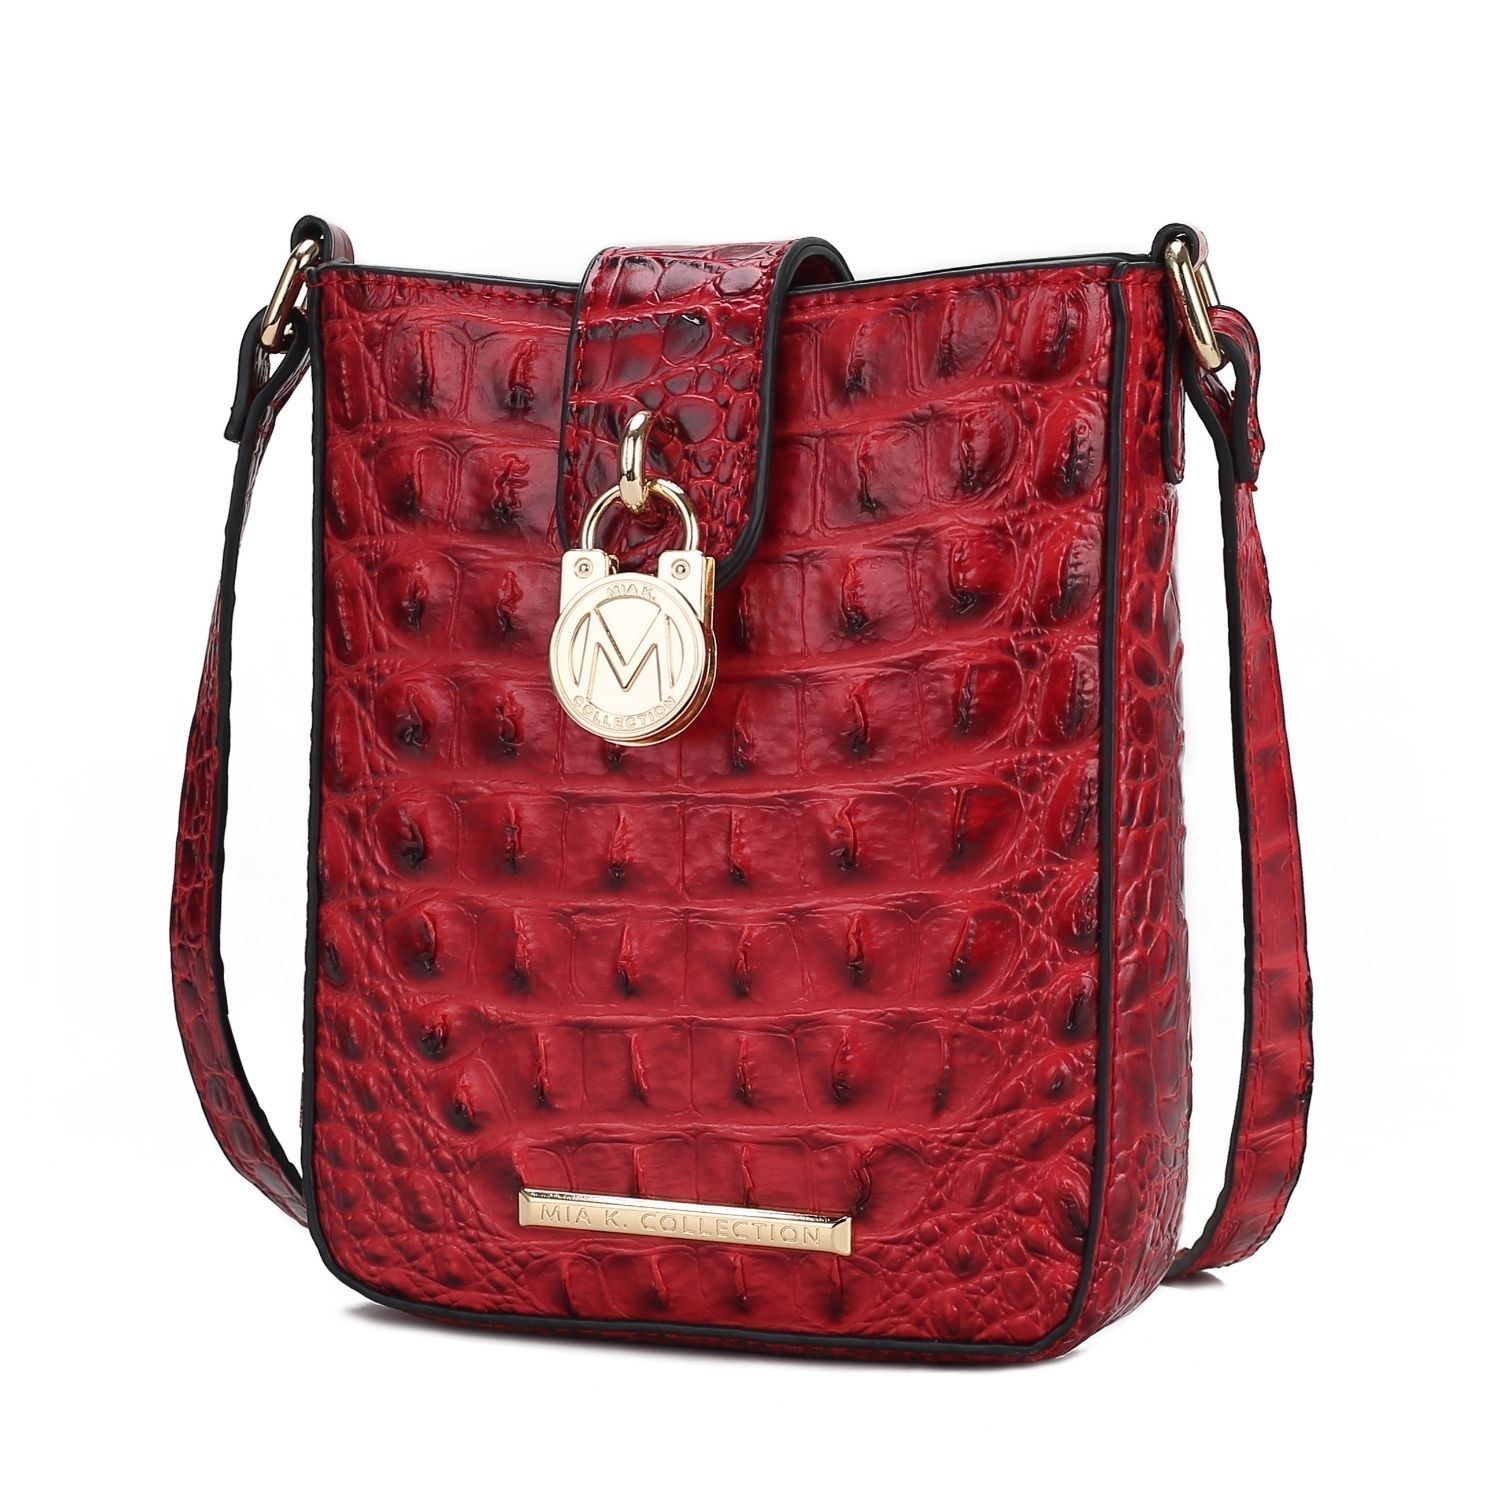 MKF Collection Avery Faux Crocodile Embossed Vegan Leather Women's Crossbody Bag By Mia K - Red